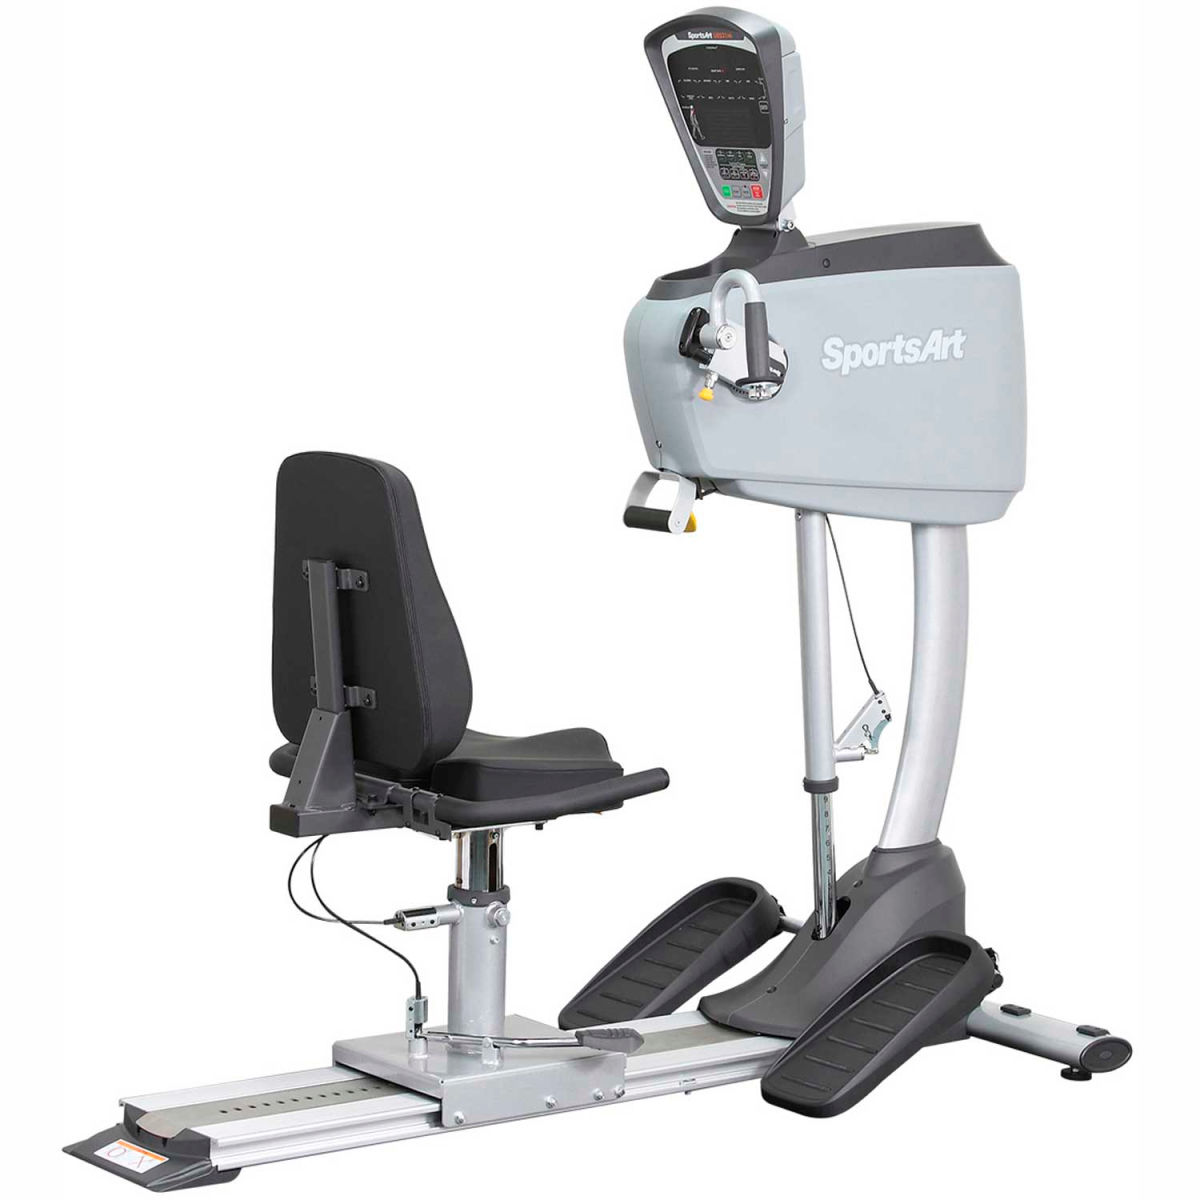 Picture of Fabrication Enterprises B2176877 SportsArt Fitness UB521M Upper Body Ergometer with Adjustable Seat - 69 x 28 x 70 in.